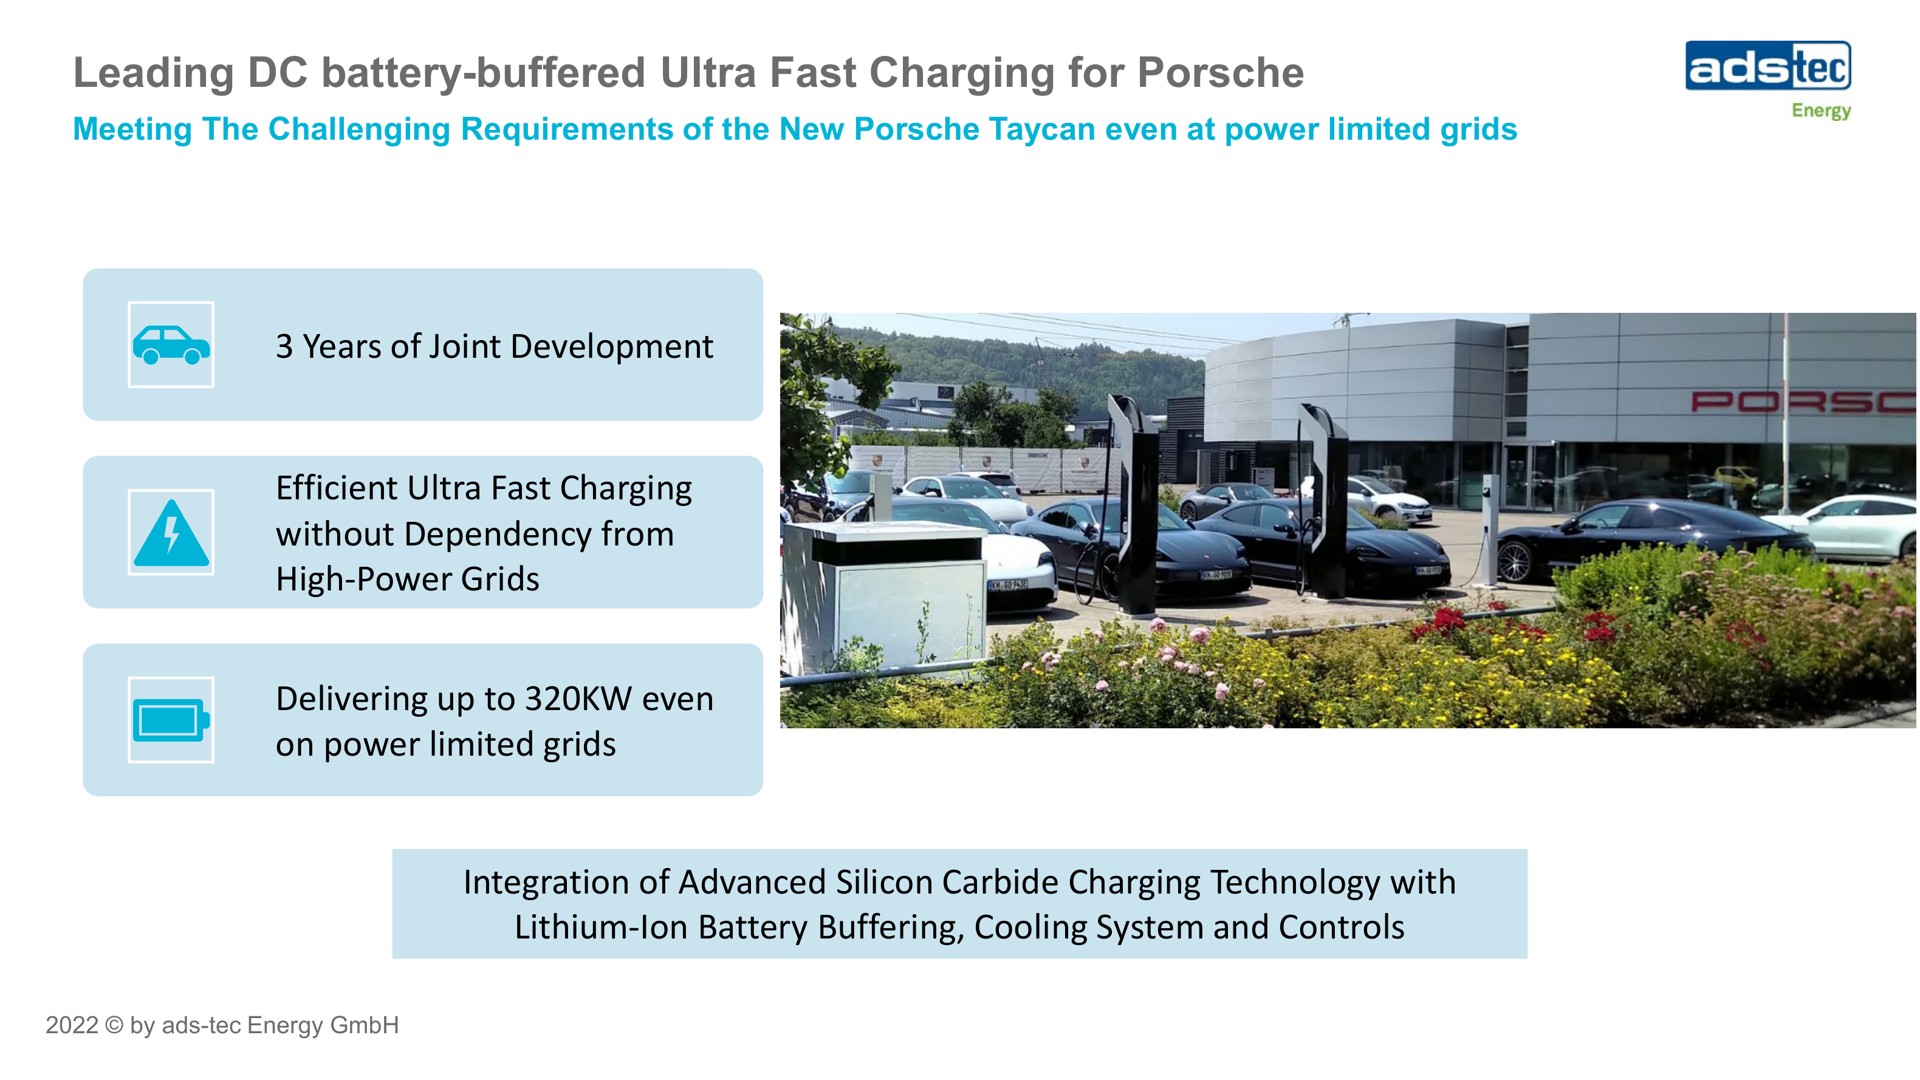 ads tec energy leading battery buffered ultra fast charging for years of joint development efficient ultra fast charging without dependency from high power grids delivering up to even on power limited grids integration of advanced silicon carbide charging technology with lithium ion battery buffering cooling system and controls a | ads-tec Energy